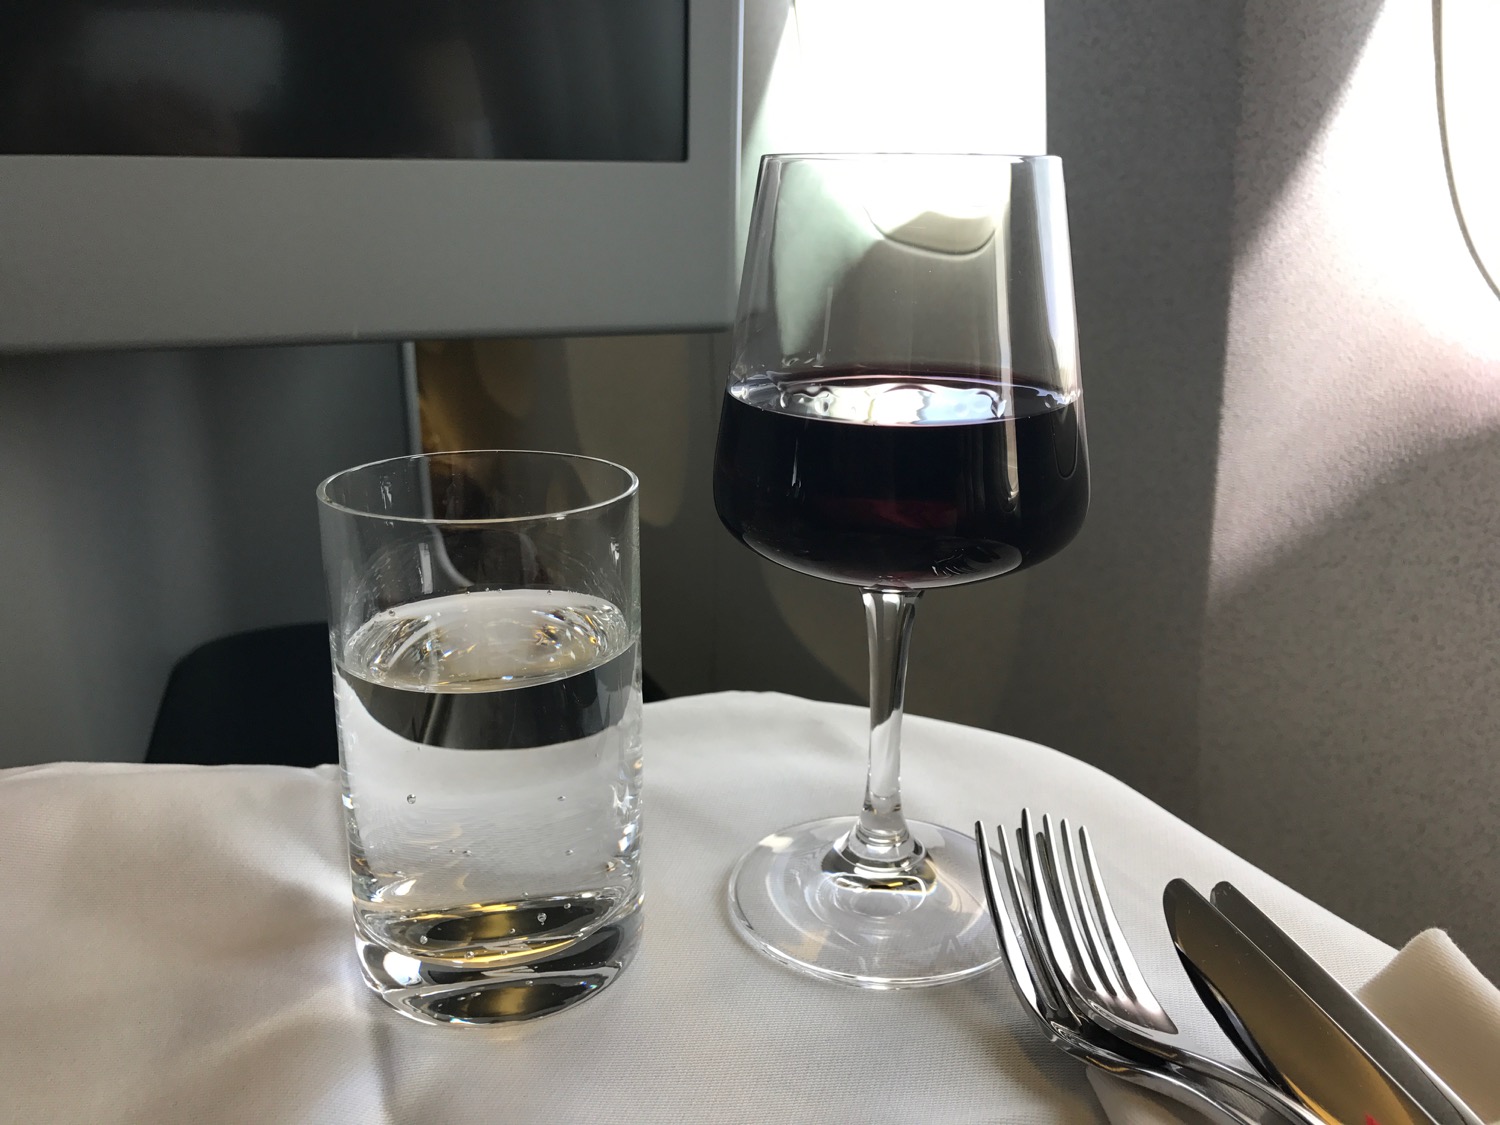 a glass of wine next to a glass of water and silverware